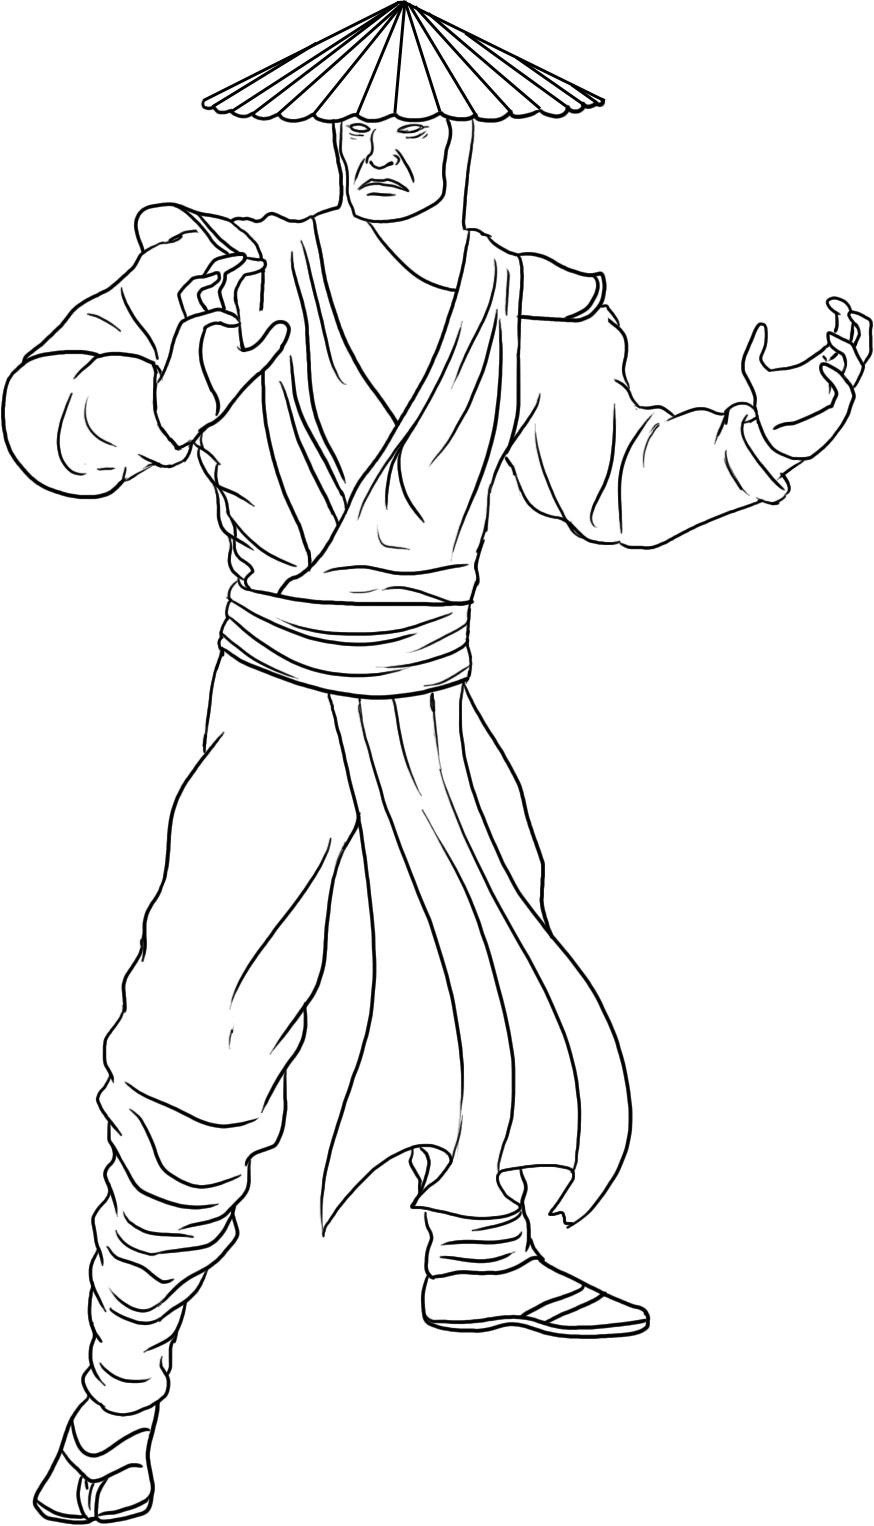 Coloring Pages For Boys Mortal Kombat
 Free Printable Mortal Kombat Coloring Pages For Kids